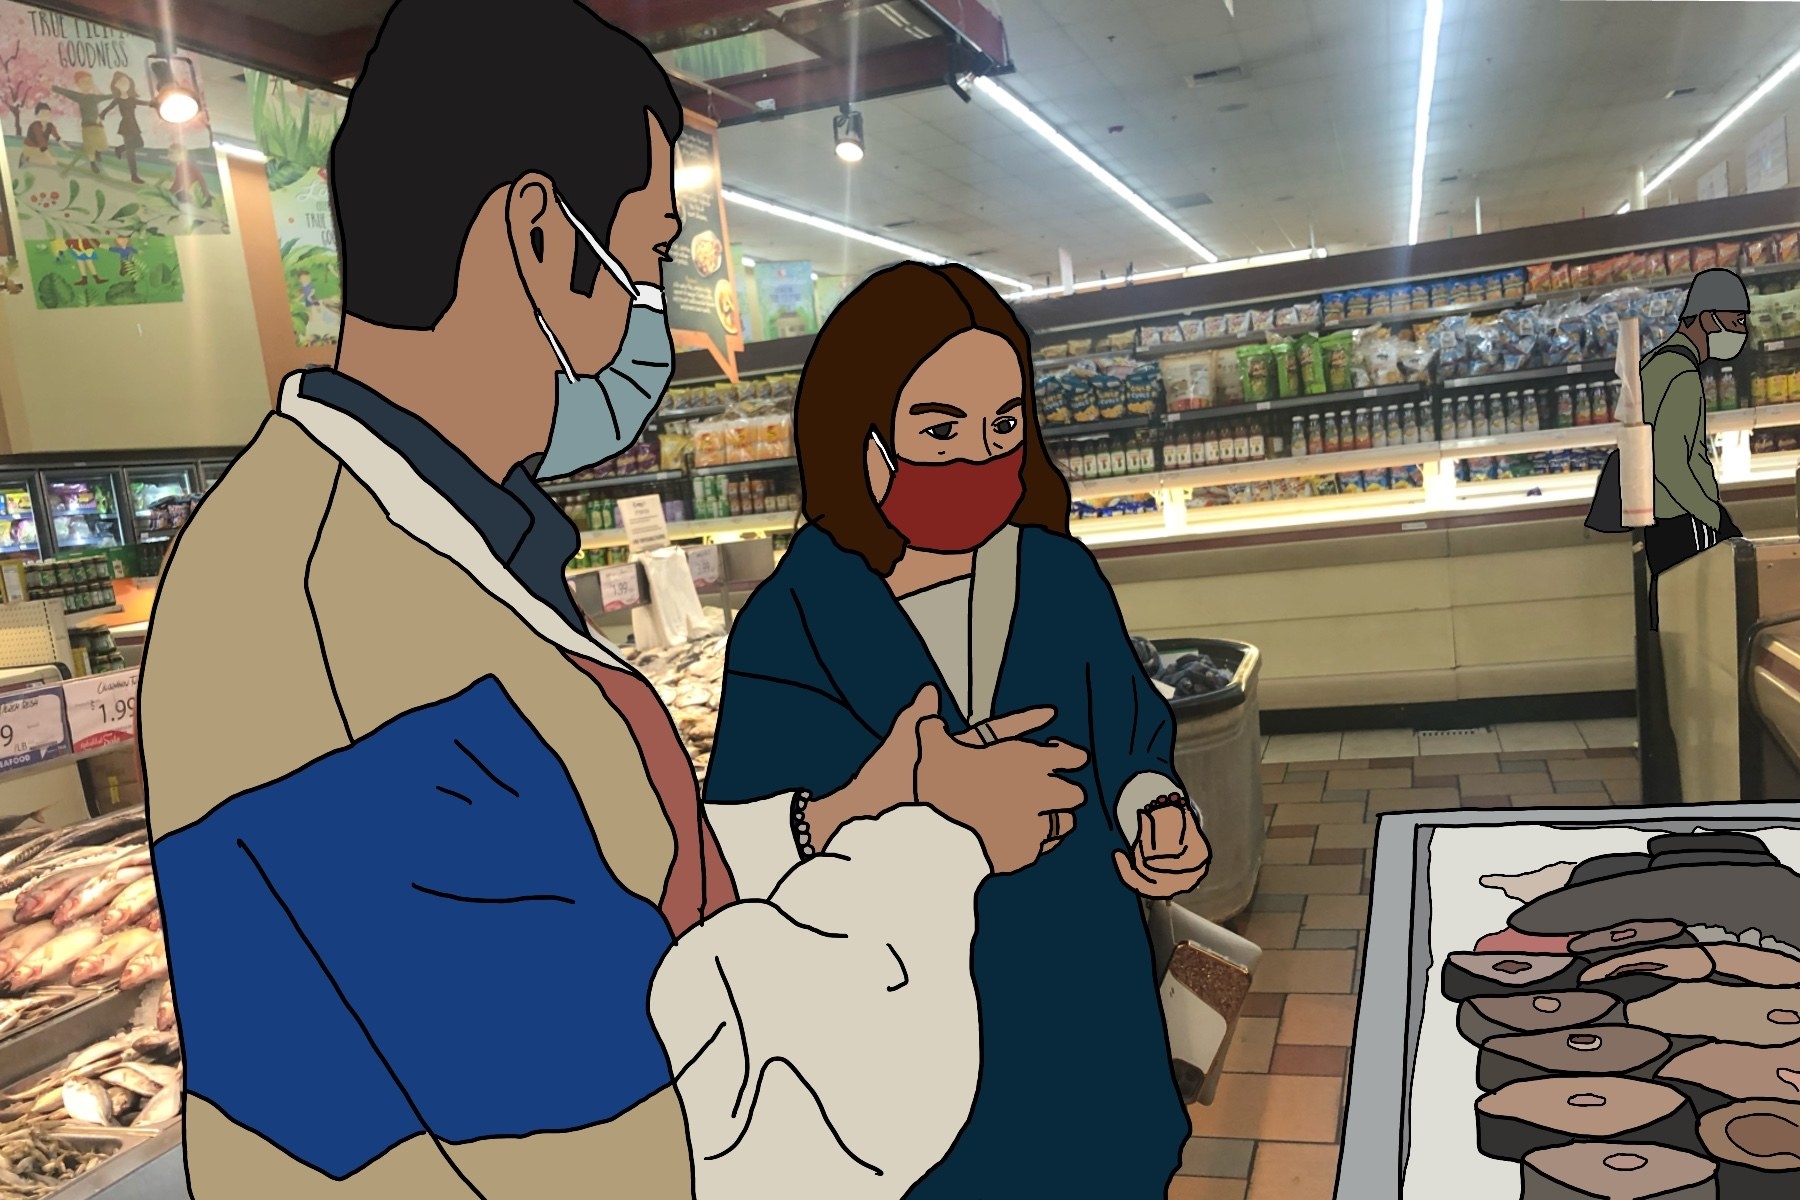 Illustration of a young man with an older woman looking at fish in a grocery store